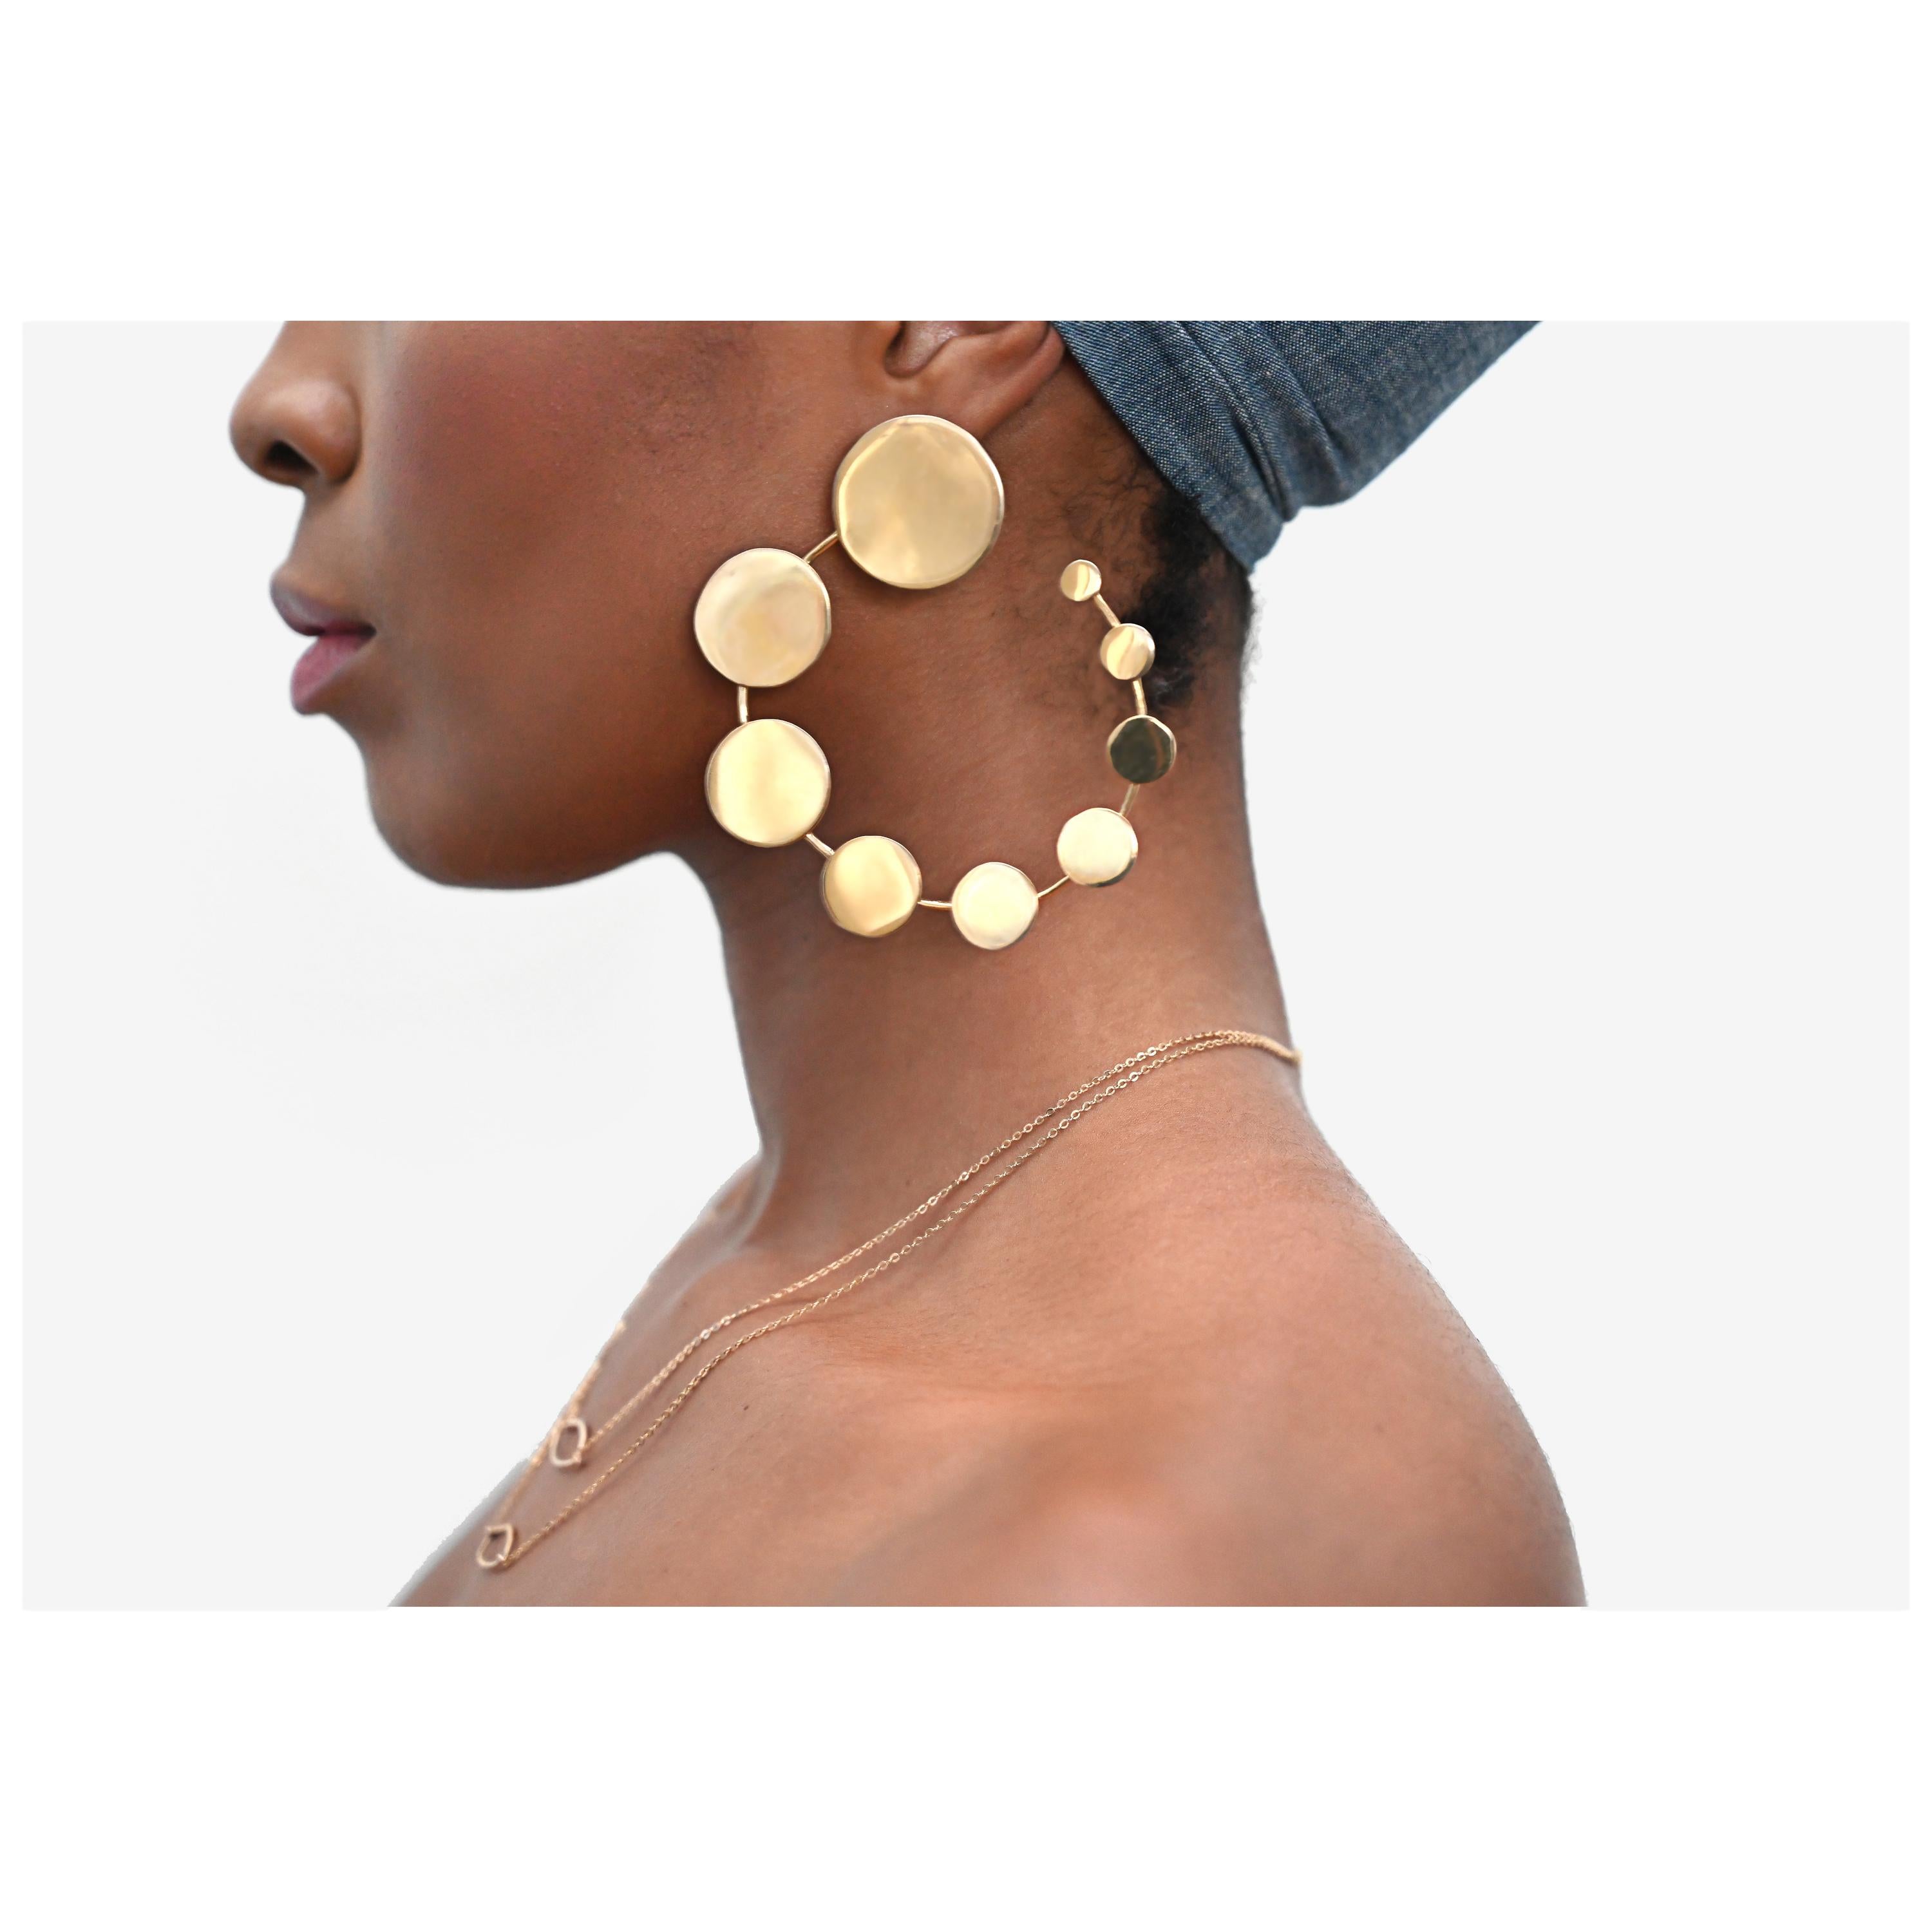 Made by Malyia 14 Karat Gold Vermeil Progression Disk Hoop Earring For Sale